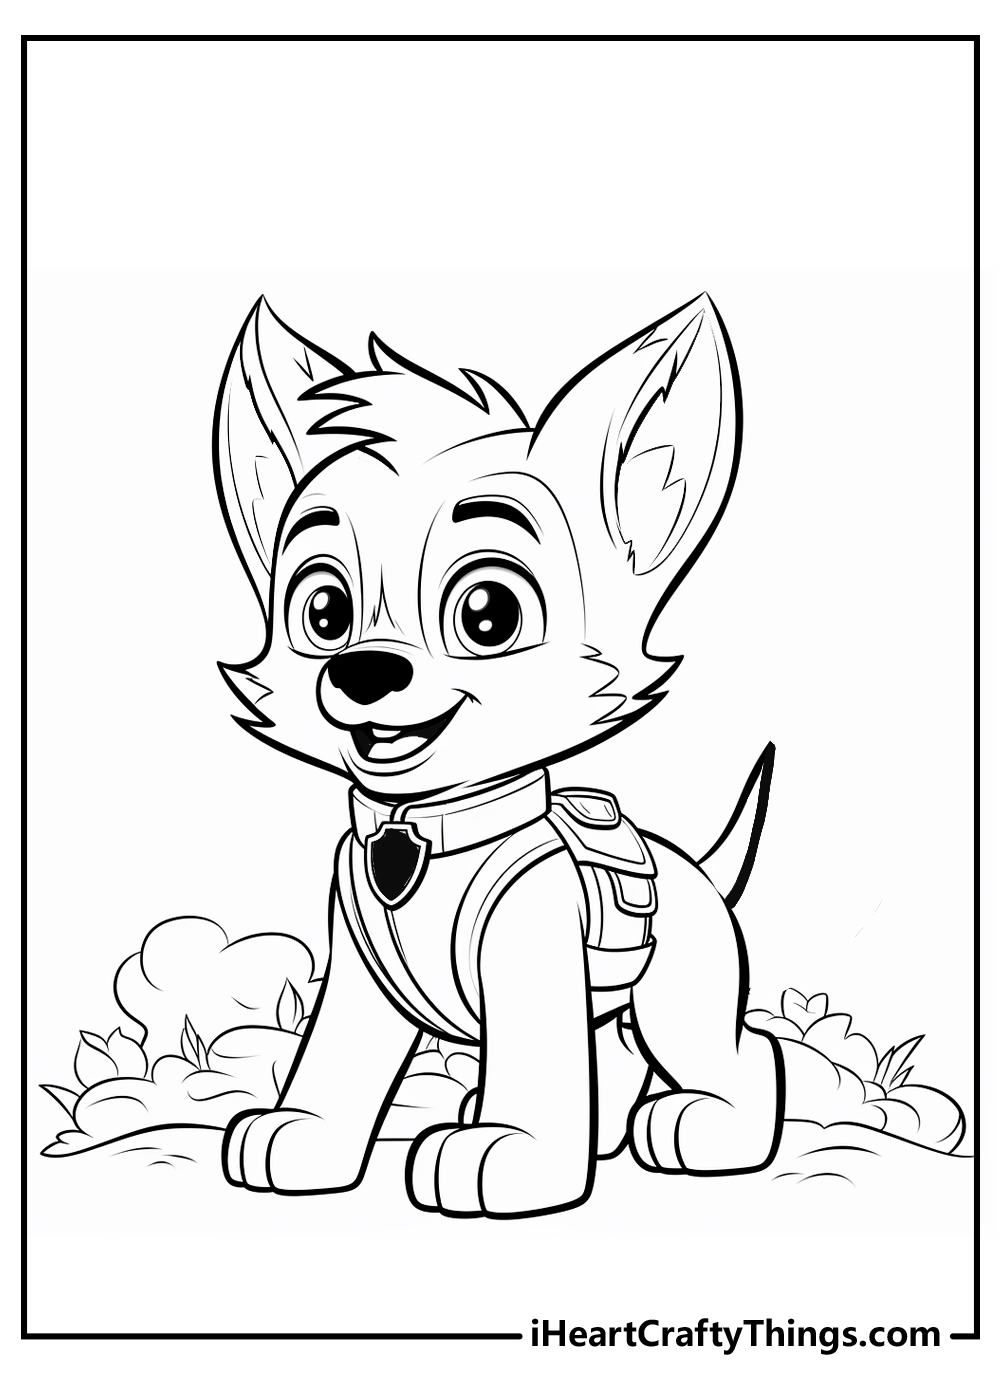 Paw patrol coloring pages free printables